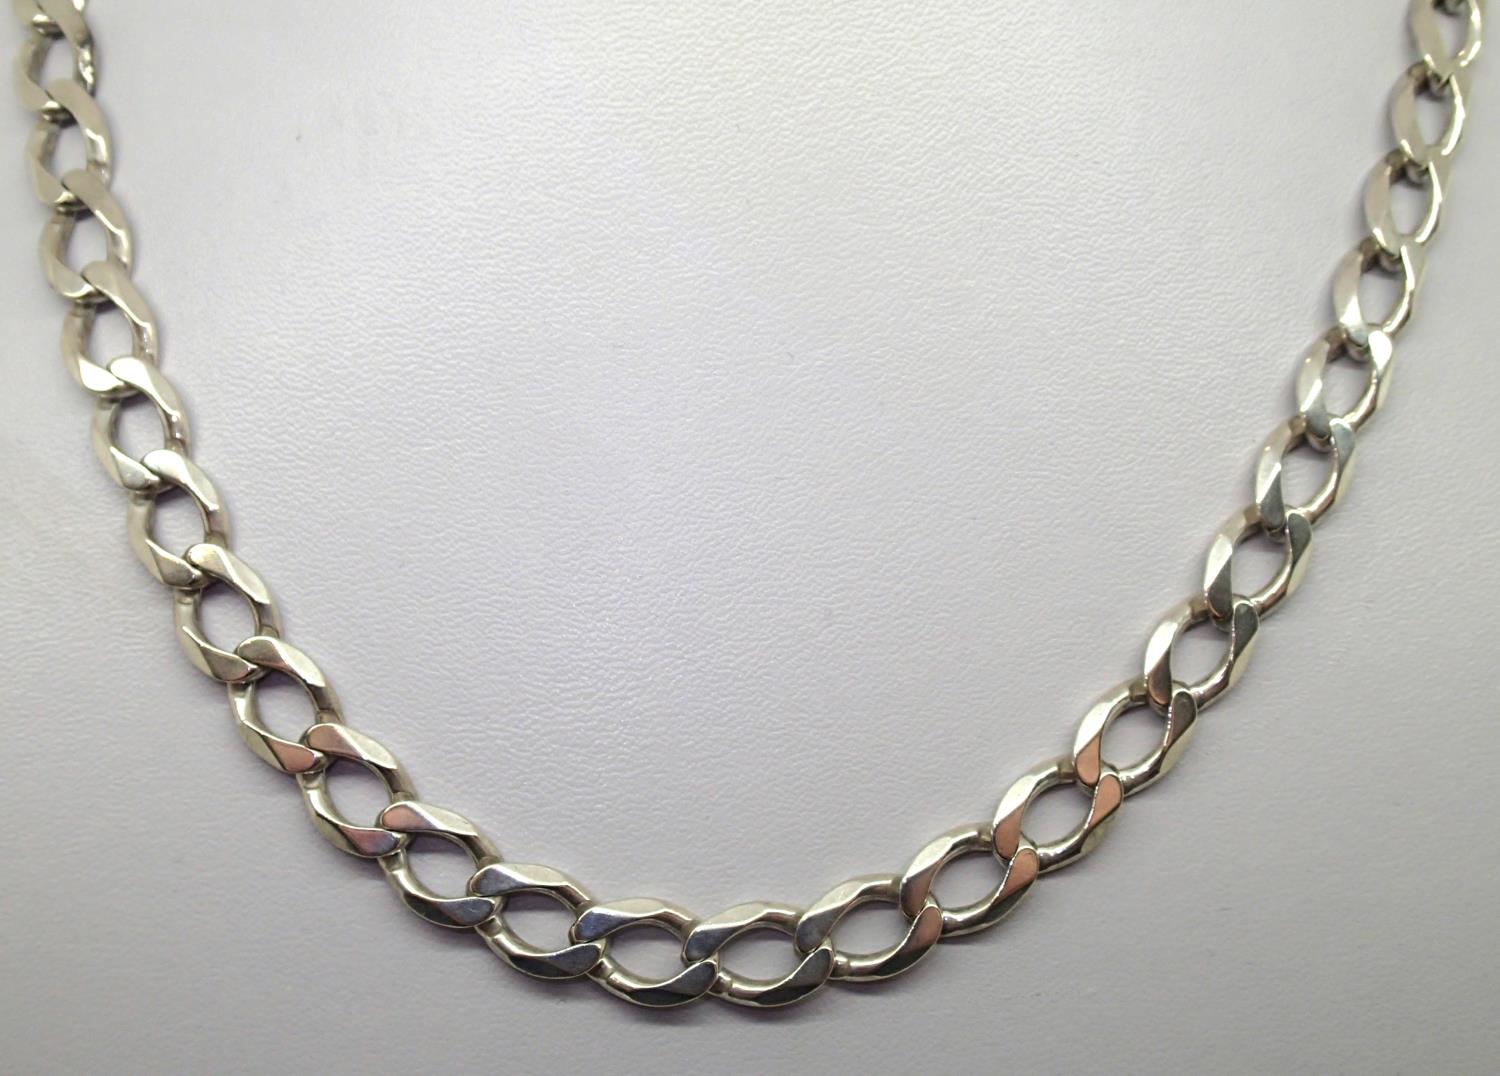 Gents 2011 silver curb chain 45g. P&P group 1 (£16 for the first item and £1.50 for subsequent